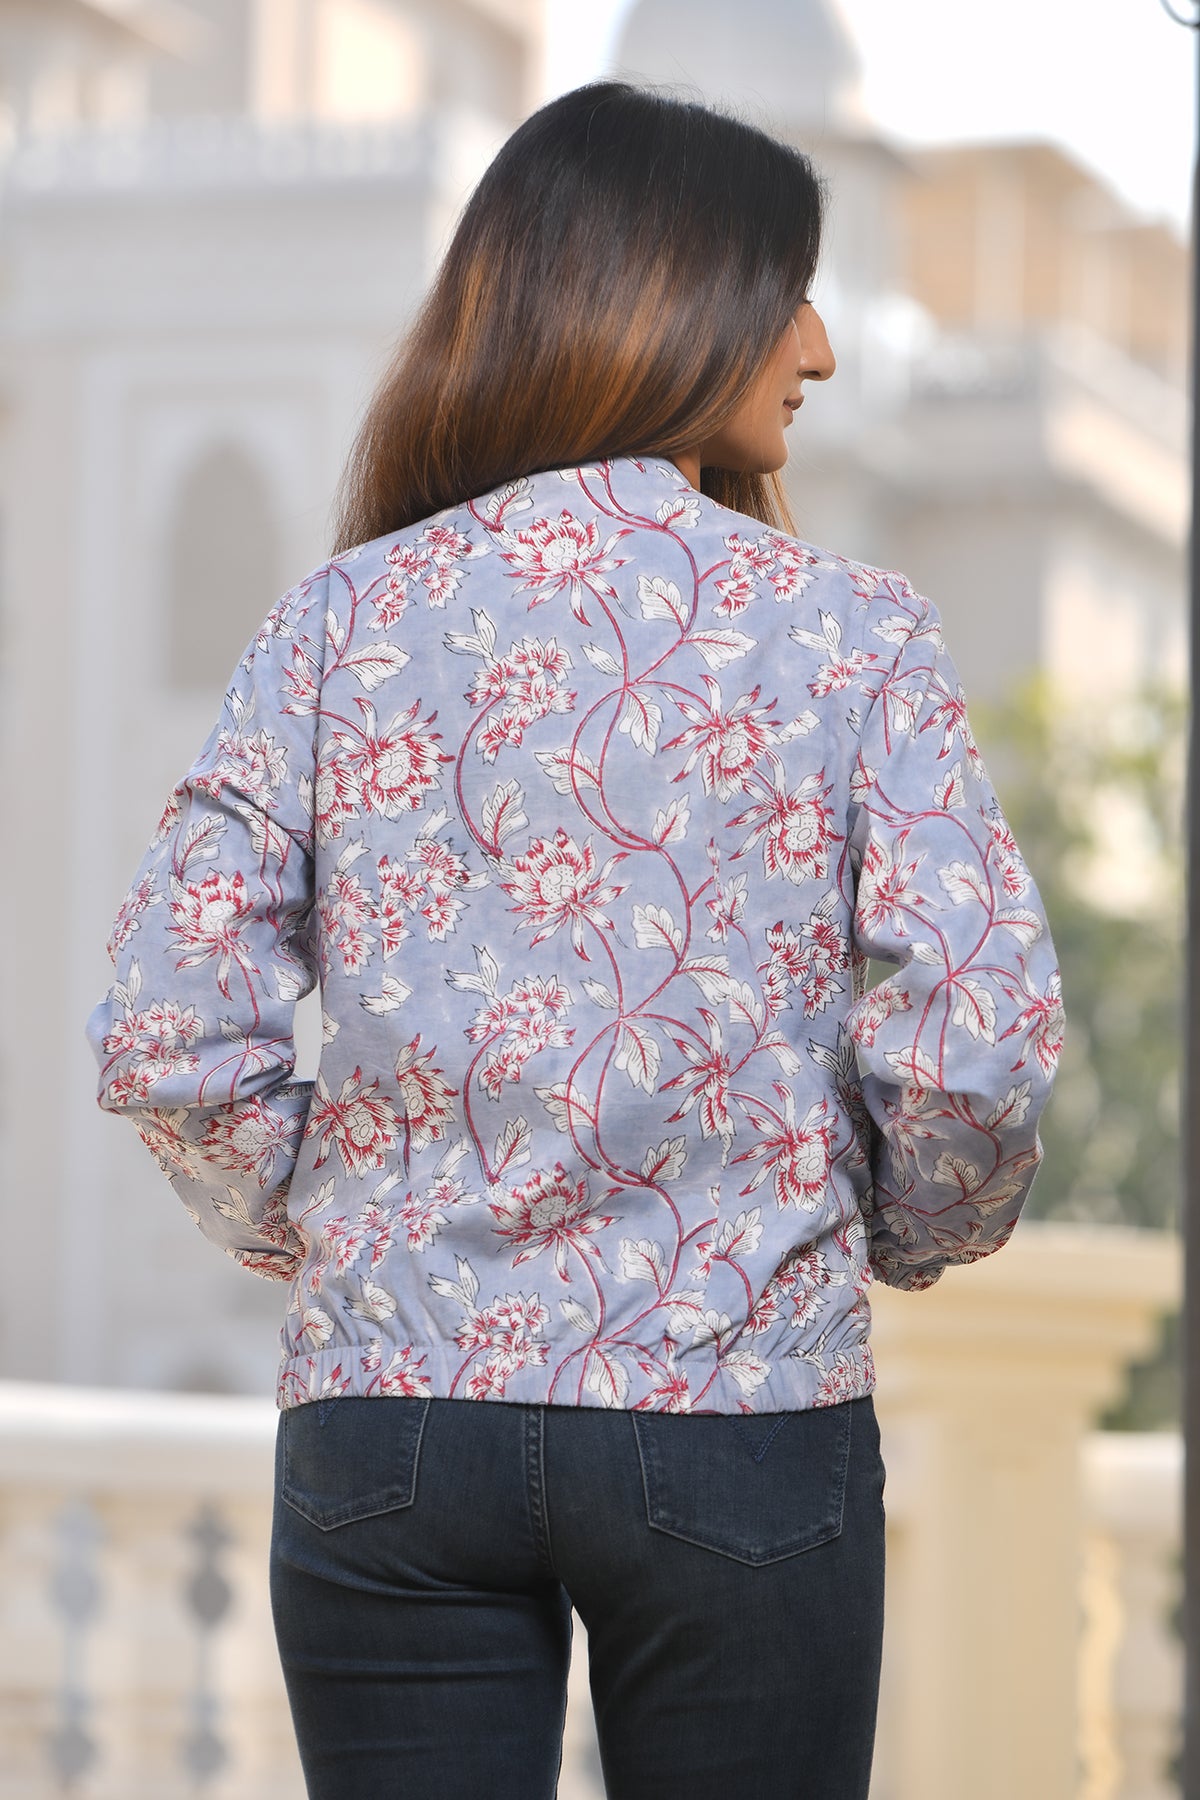 Printed Zippered Jacket with Sleeves in Grey